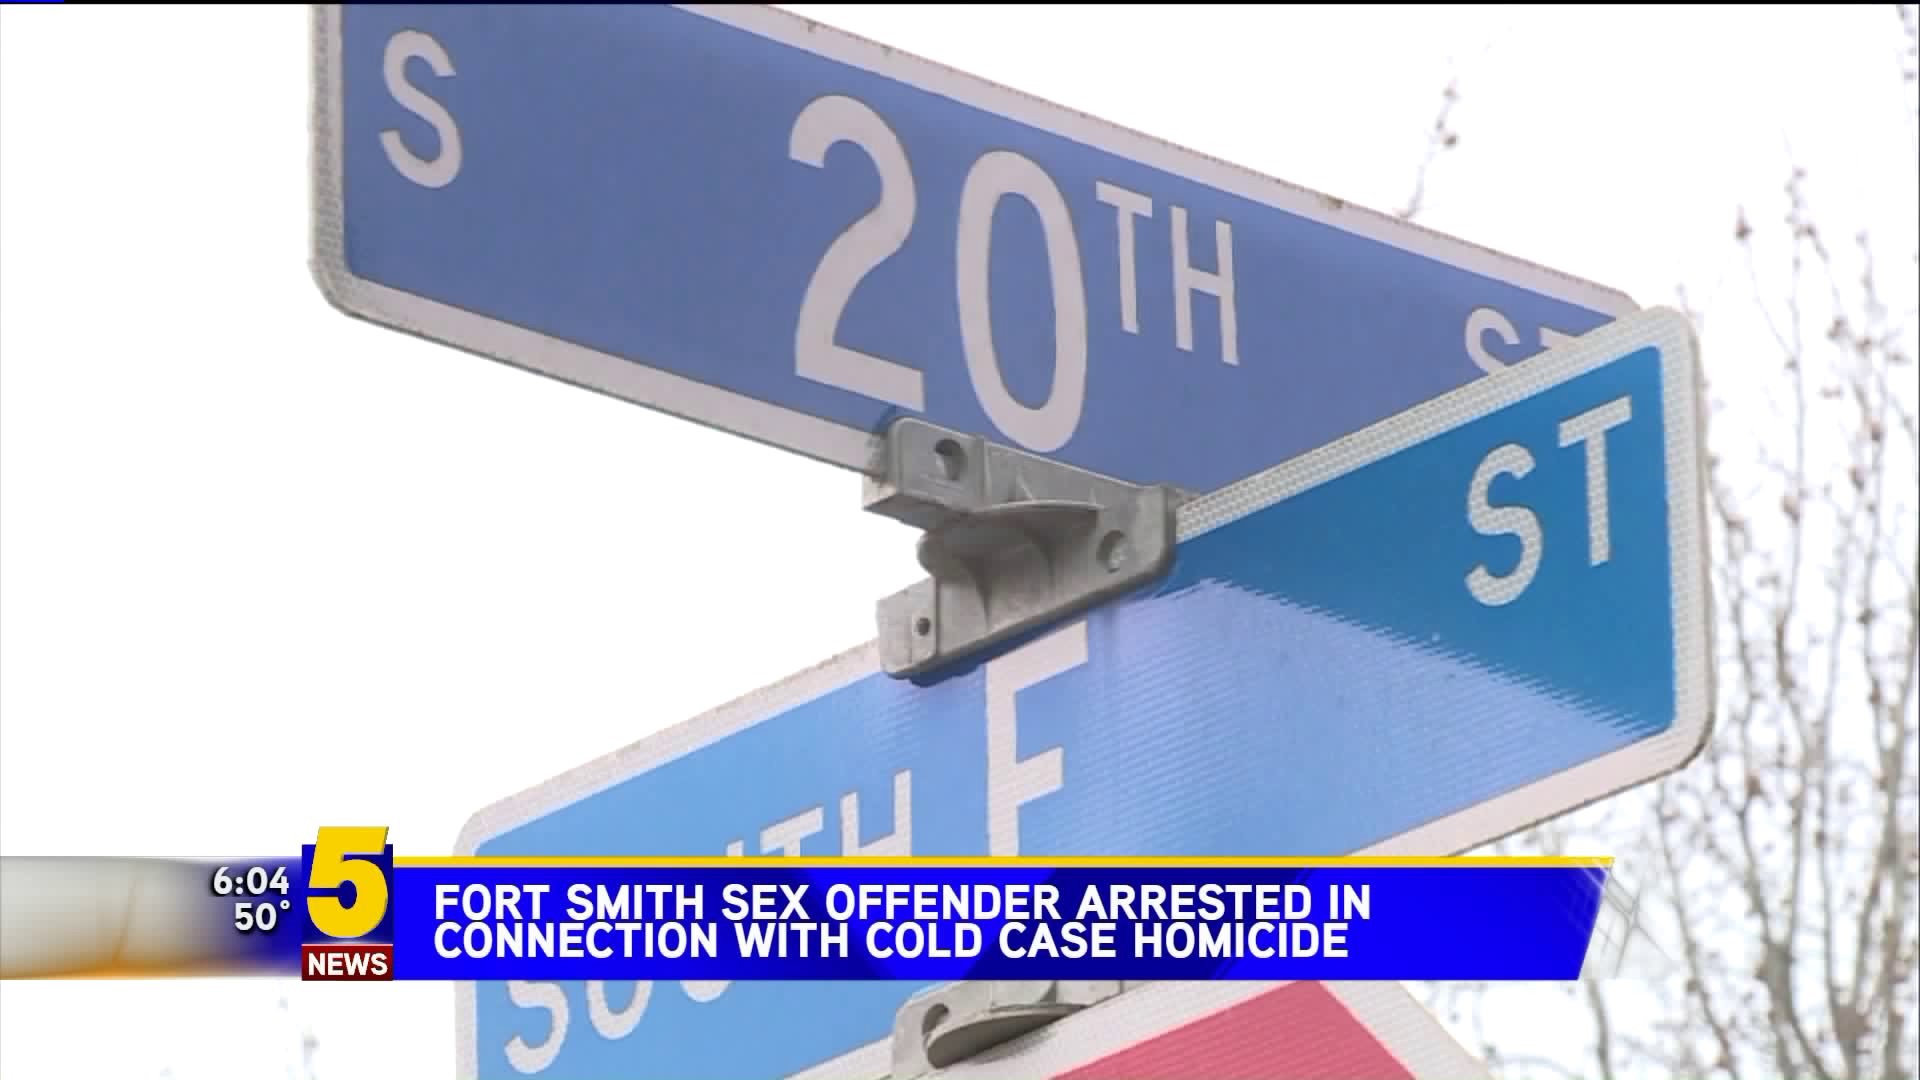 Fort Smith Sex Offender Arrested In Connection With Cold